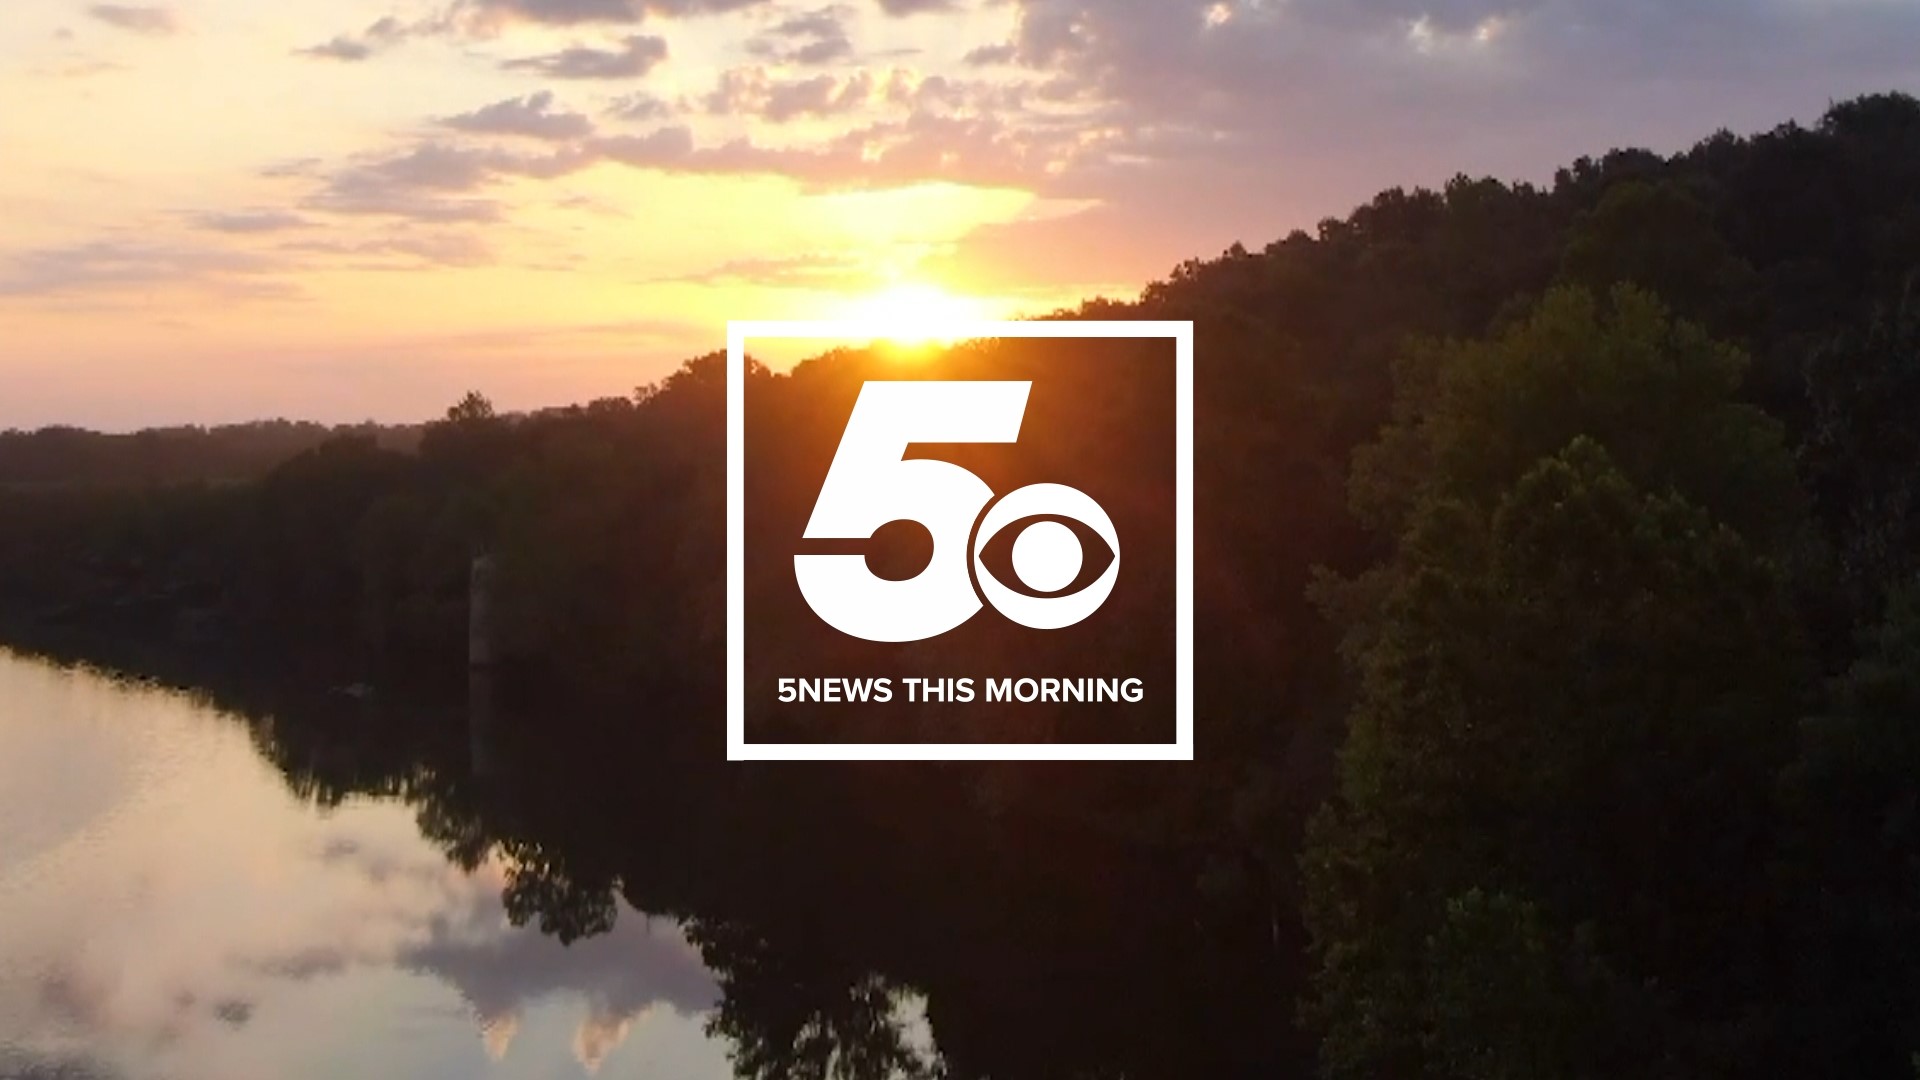 5NEWS brings you the latest news, weather, sports and traffic updates where you live.